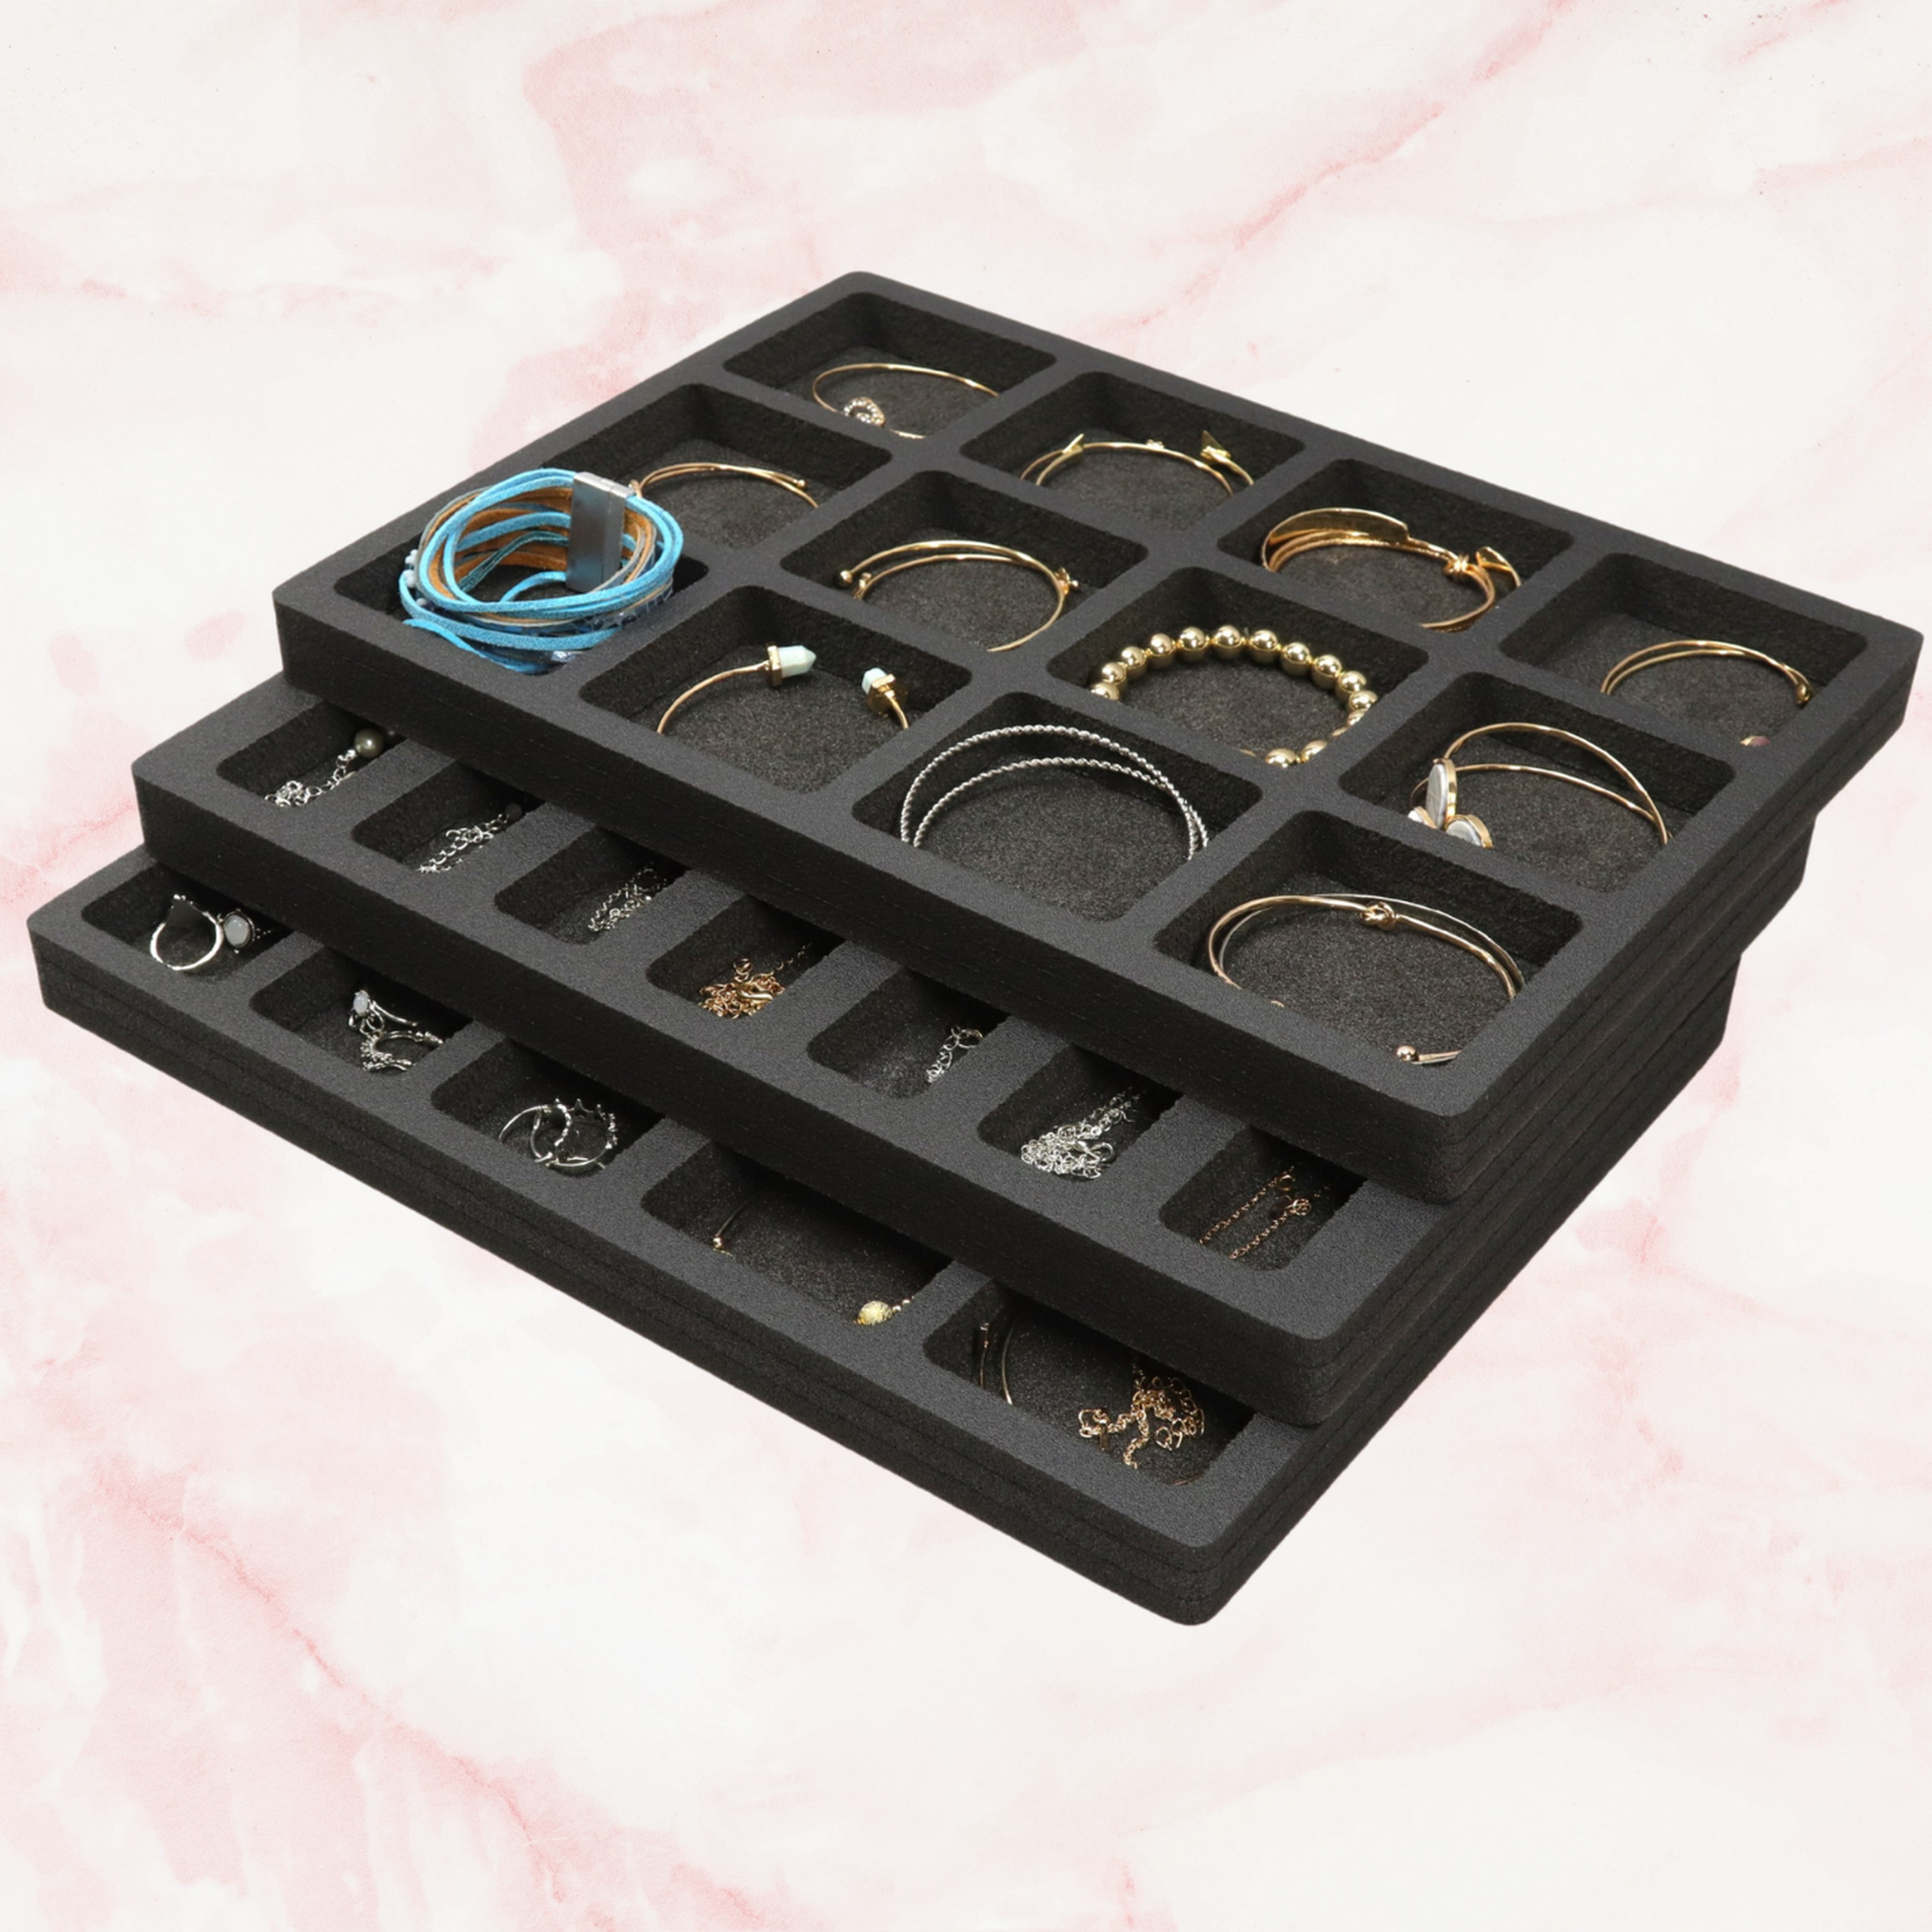 Stackable Jewelry Tray Display Organizer Grid 16x10 Black Foam Necklace More 